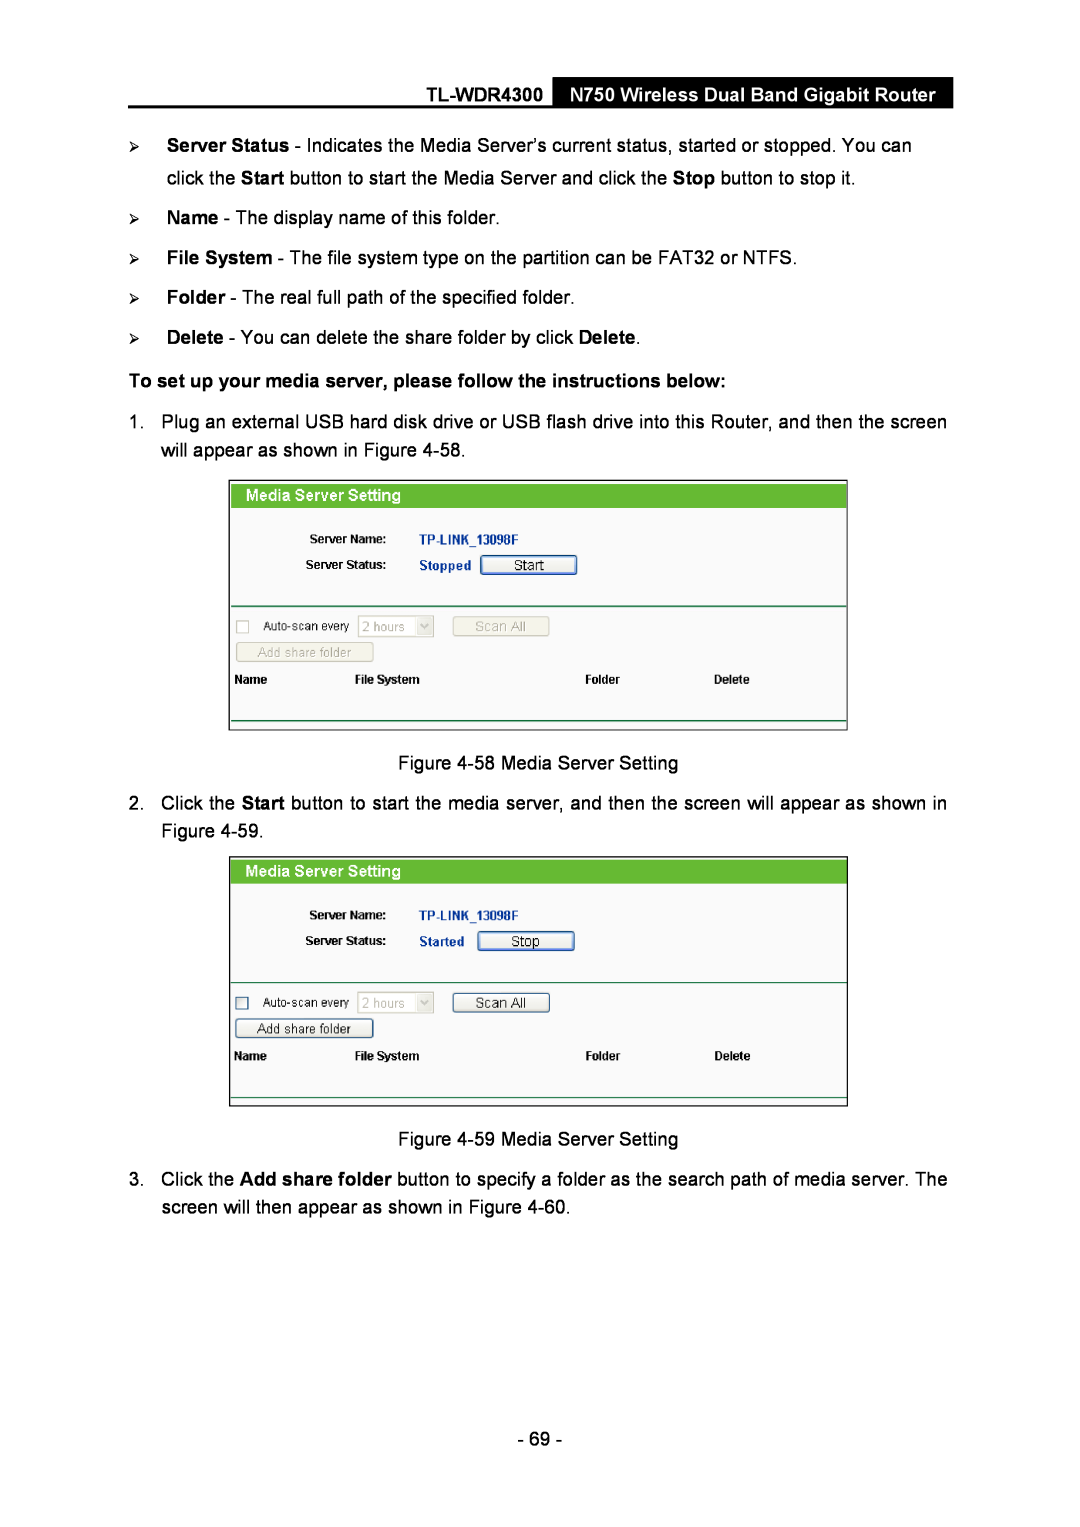 TP-Link TL-WDR4300 manual To set up your media server, please follow the instructions below 